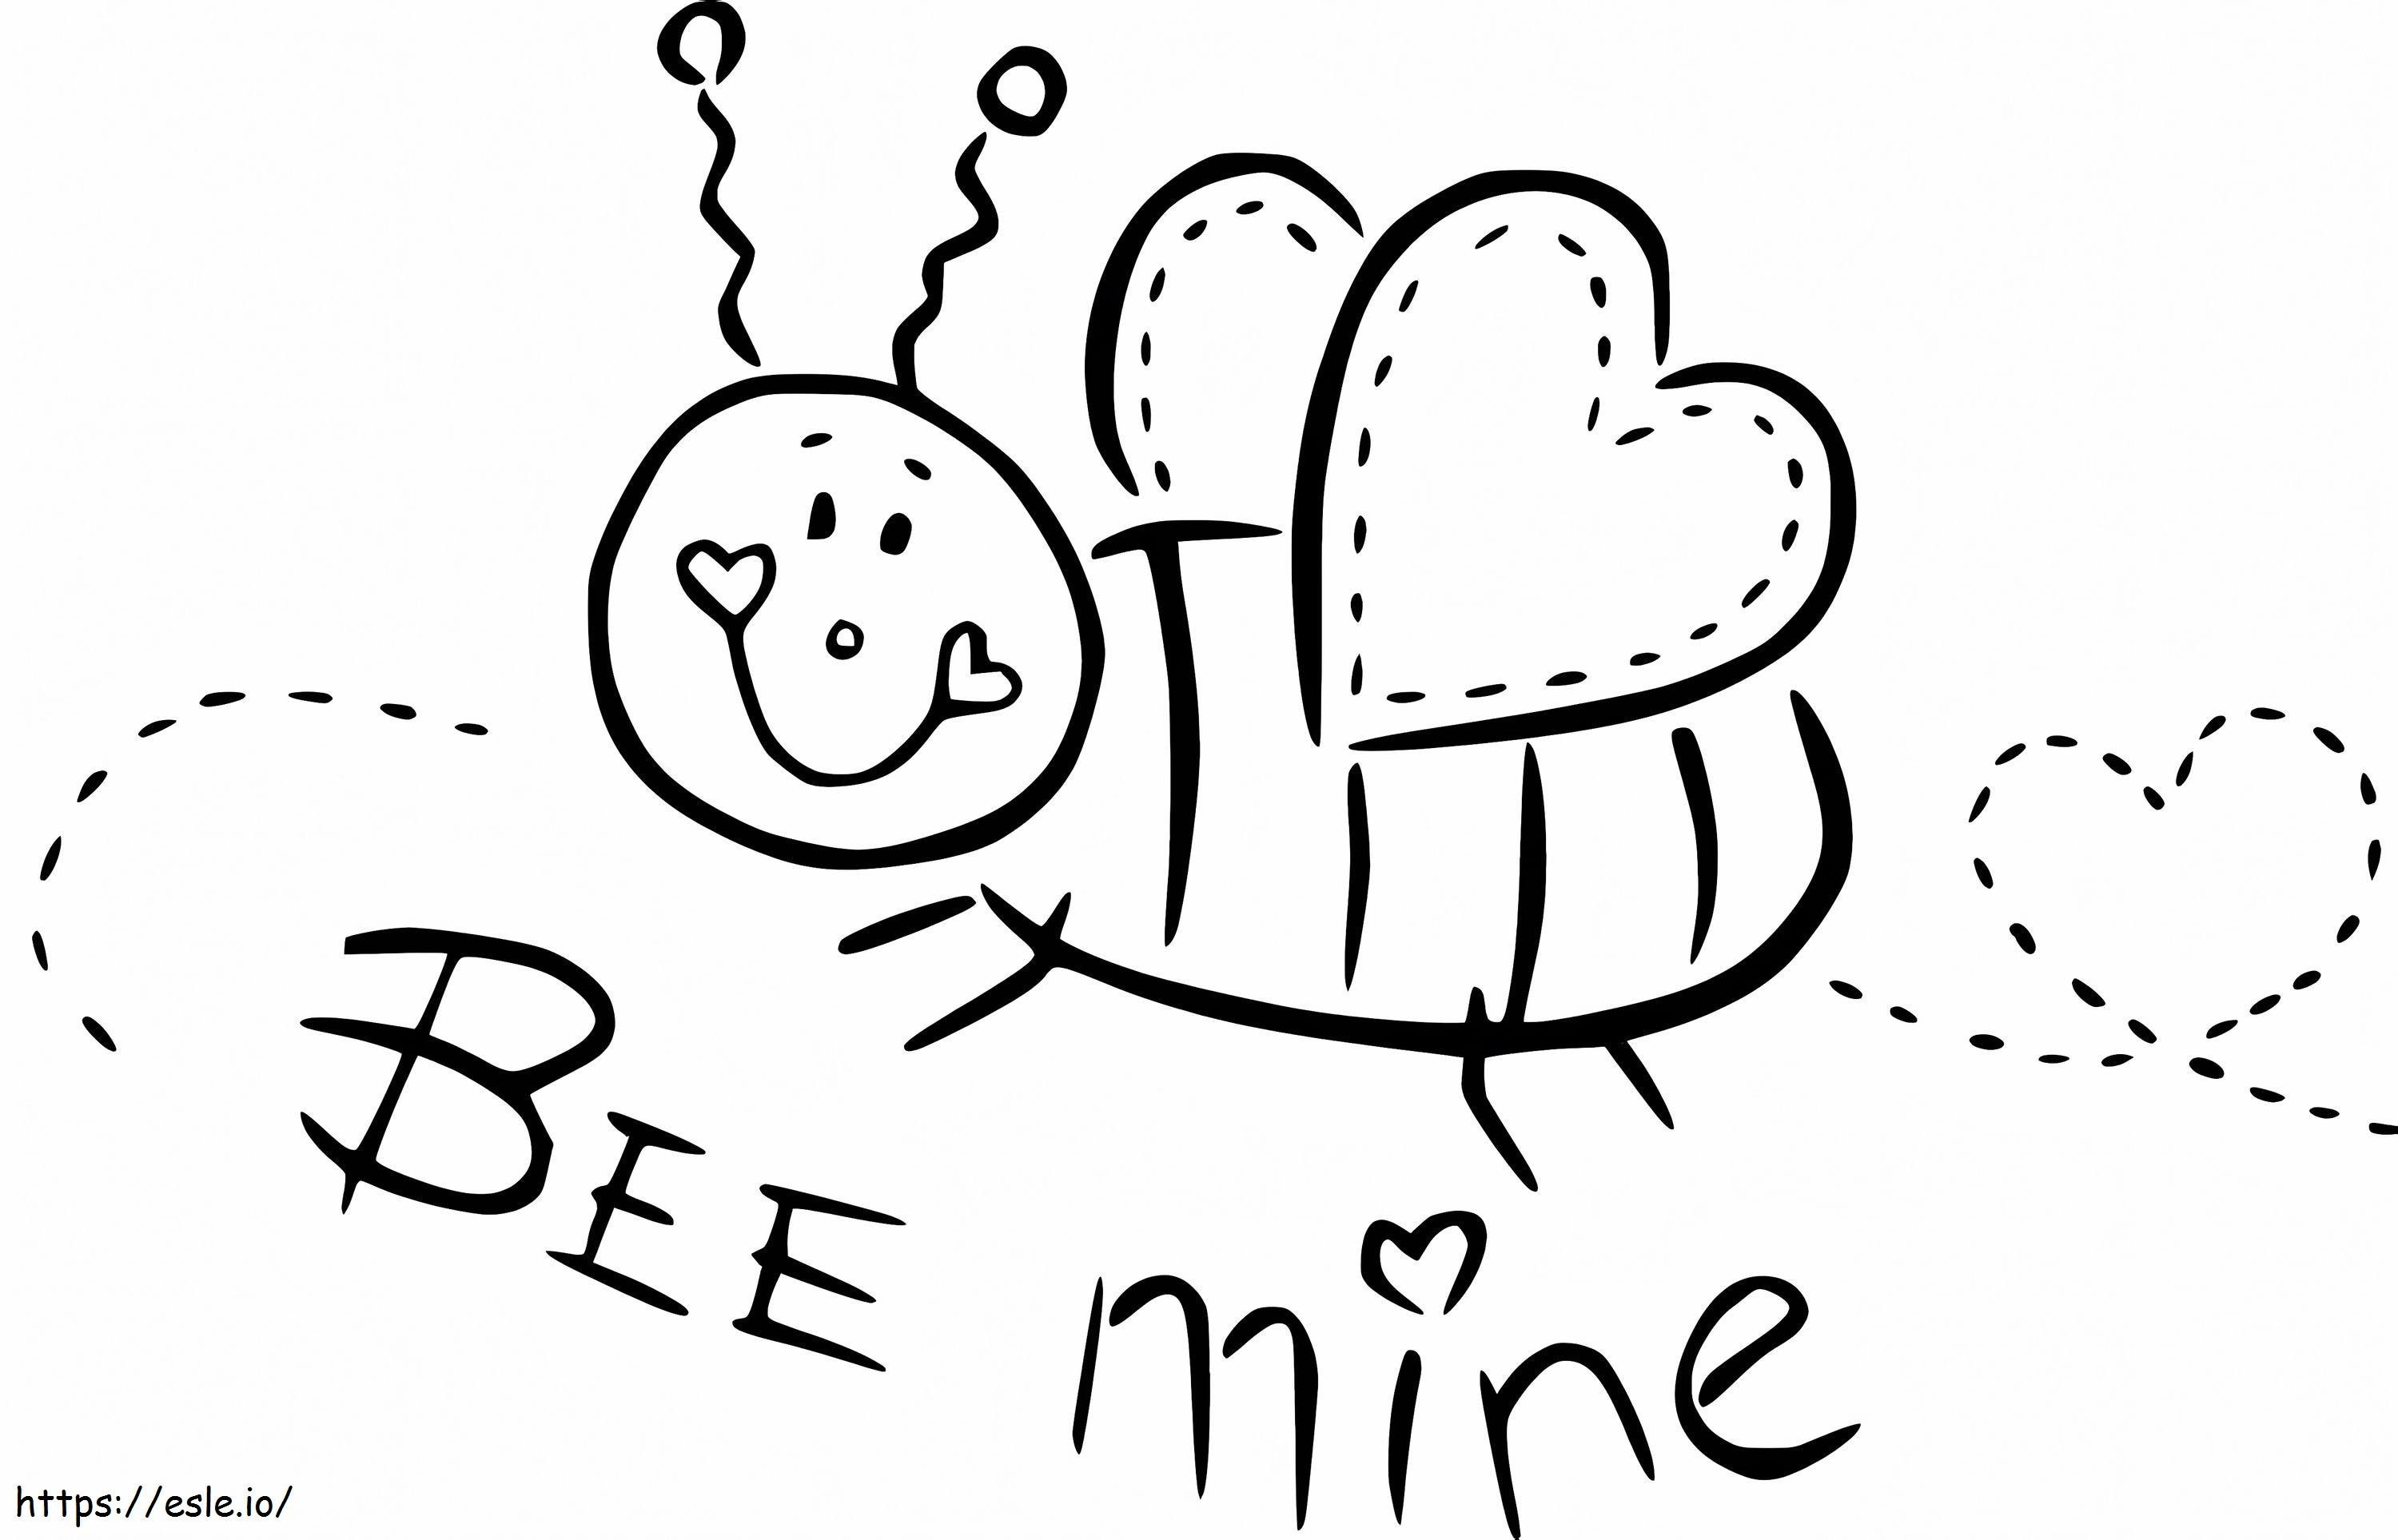 Bee Mine coloring page